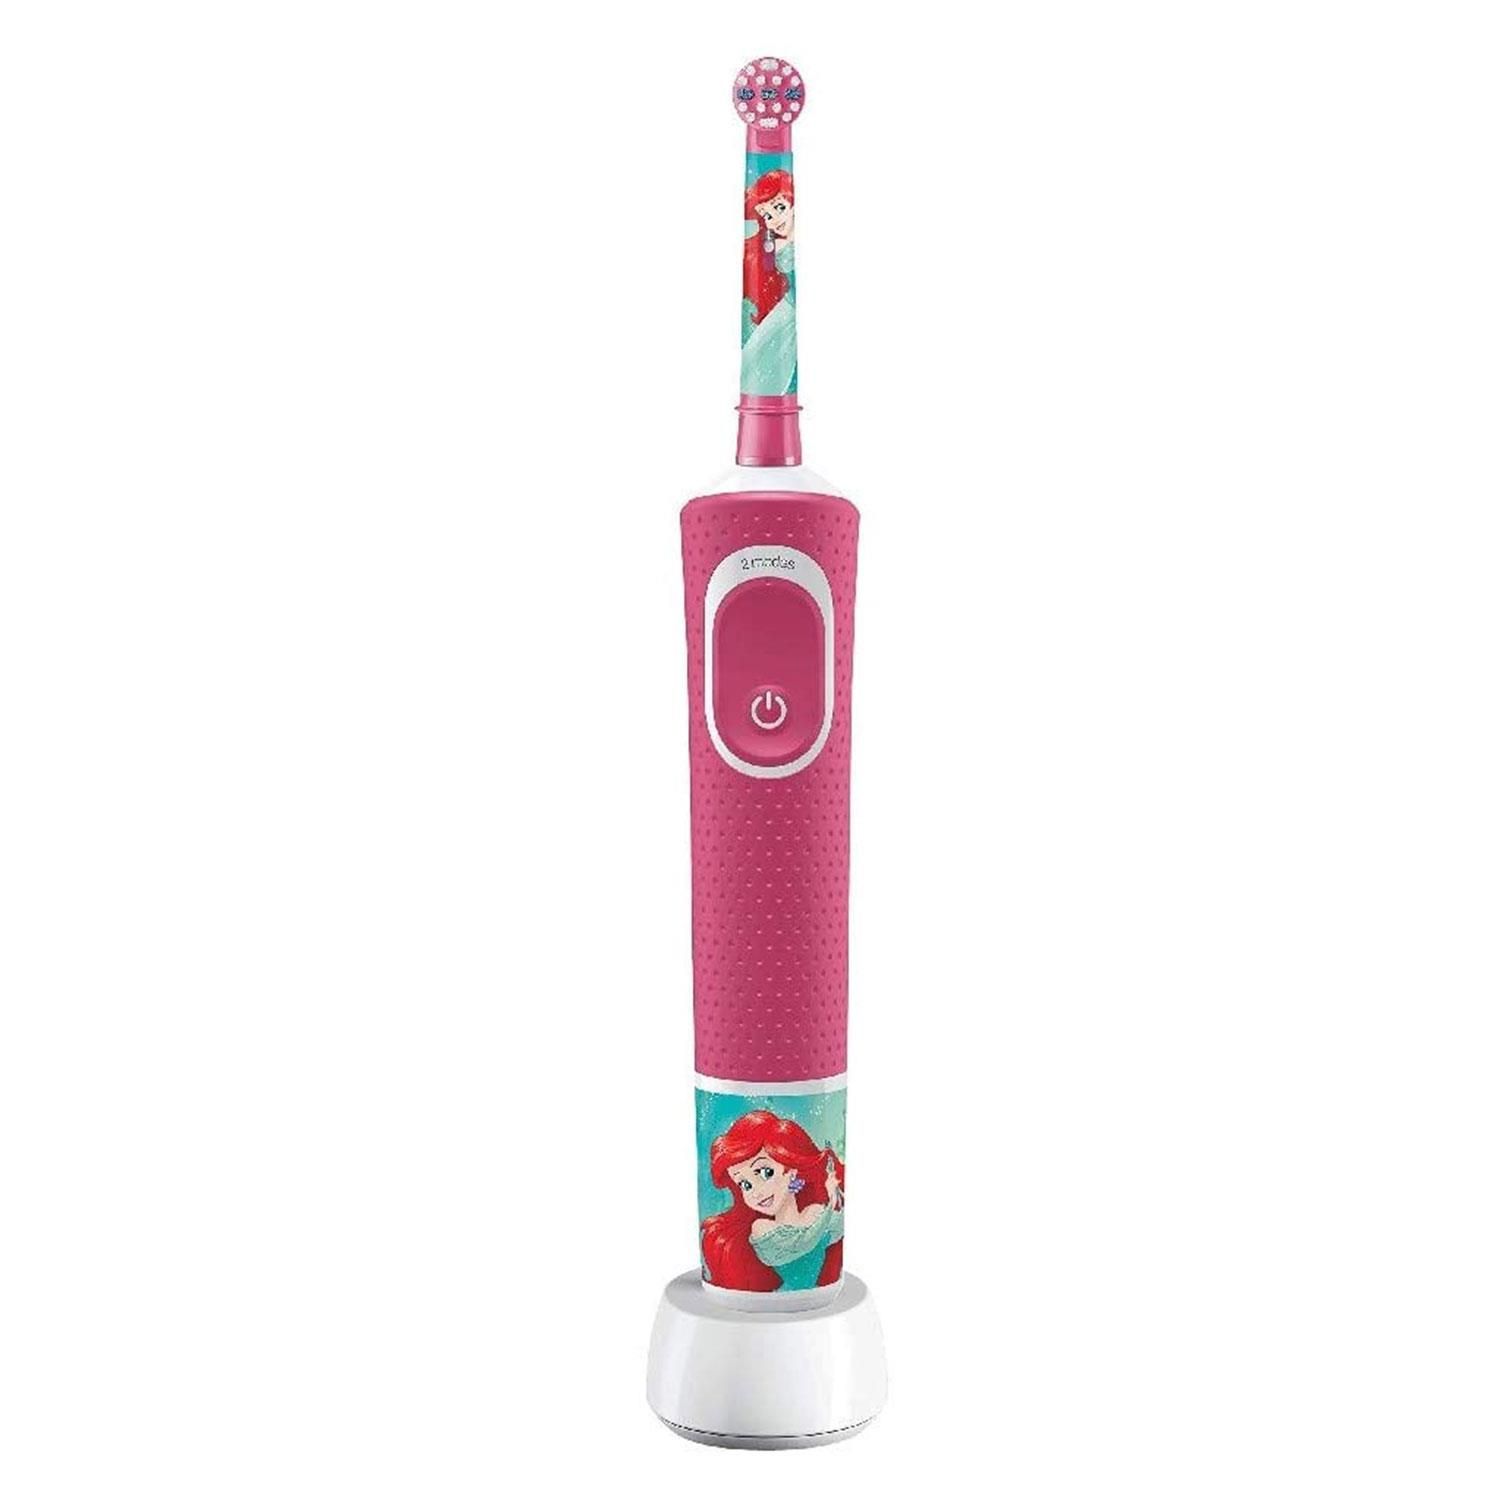 Oral-B Power Kids Electric Rechargeable Toothbrush Featuring Disney Princesses.  The Oral-B Stages Power Kids Electric Toothbrush, featuring fun and friendly Disney princesses, puts the power of clean in little hands. This rechargeable electric toothbrush features extra-soft bristles for young mouths and is compatible with the Disney MagicTimer app by Oral-B. Download the app to help your kids brush for a dentist-recommended 2 minutes and learn proper oral care habits that will last them a lifetime.

Features:

  Rotating powerhead reaches, surrounds and thoroughly cleans multiple surfaces
  Extra-soft bristles clean teeth as gently as a soft manual brush
  Removes more plaque than a regular manual toothbrush
  Makes brushing teeth fun with Disney Princess characters
  Compatible with the Disney MagicTimer App by Oral-B to help kids brush longer
  9 out of 10 kids will brush longer with the MagicTimer App
  Rechargeable battery lasts up to 5 days

The Box Contains:  Oral-B Stages Power Kids Electric Toothbrush Featuring Disney Princess, 1 Kids toothbrush head, 1 Toothbrush charger with a UK 2 pin plug